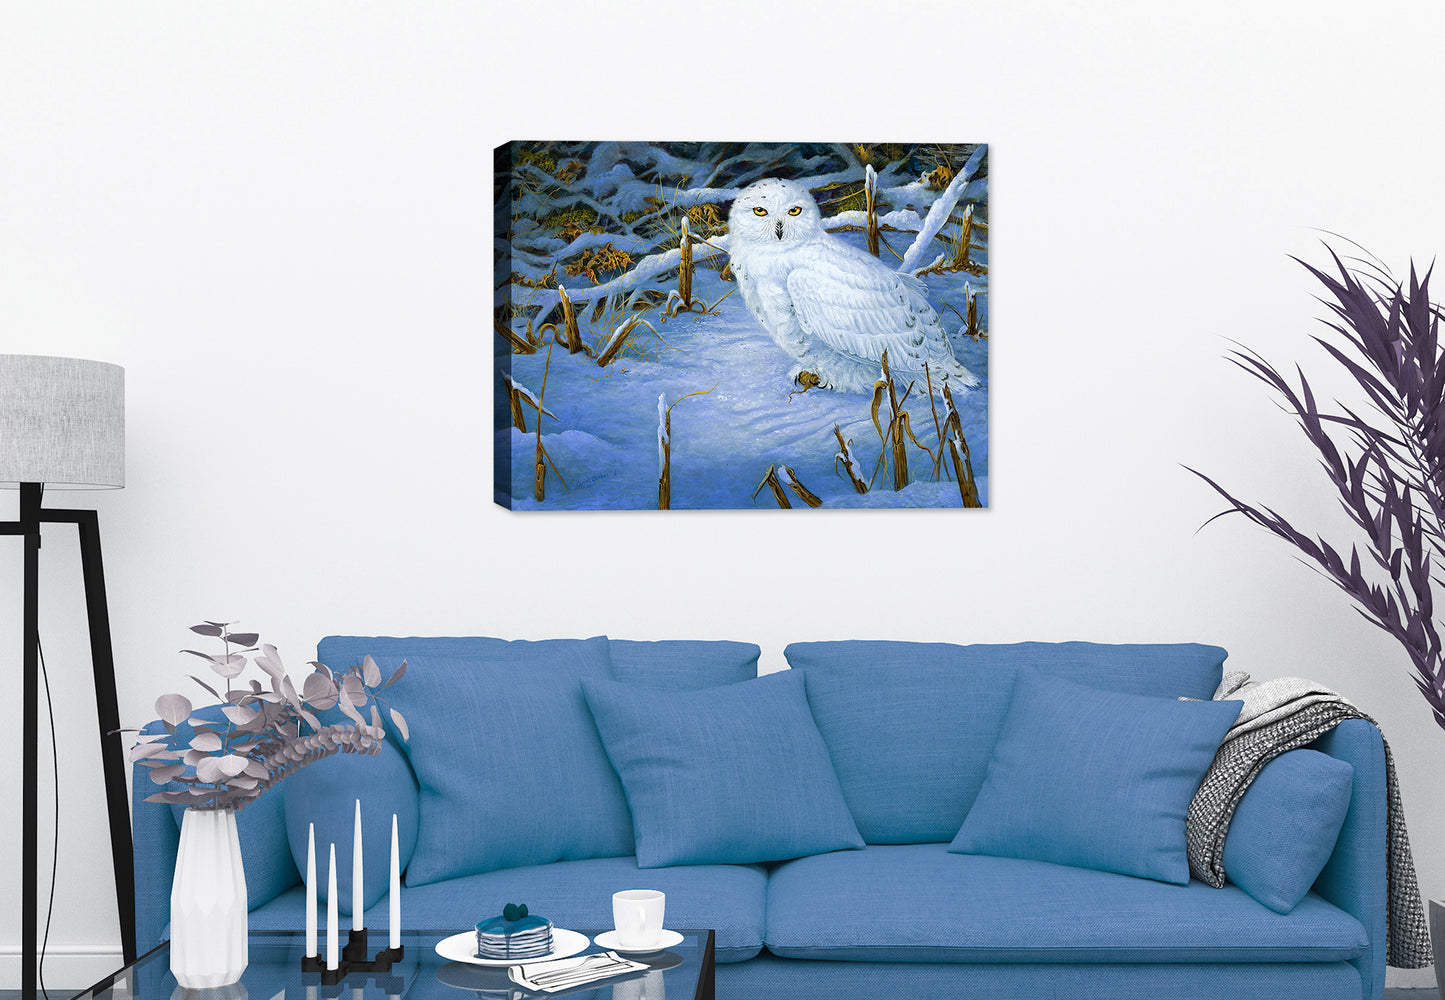 Owl Painting Hanging in Living Room